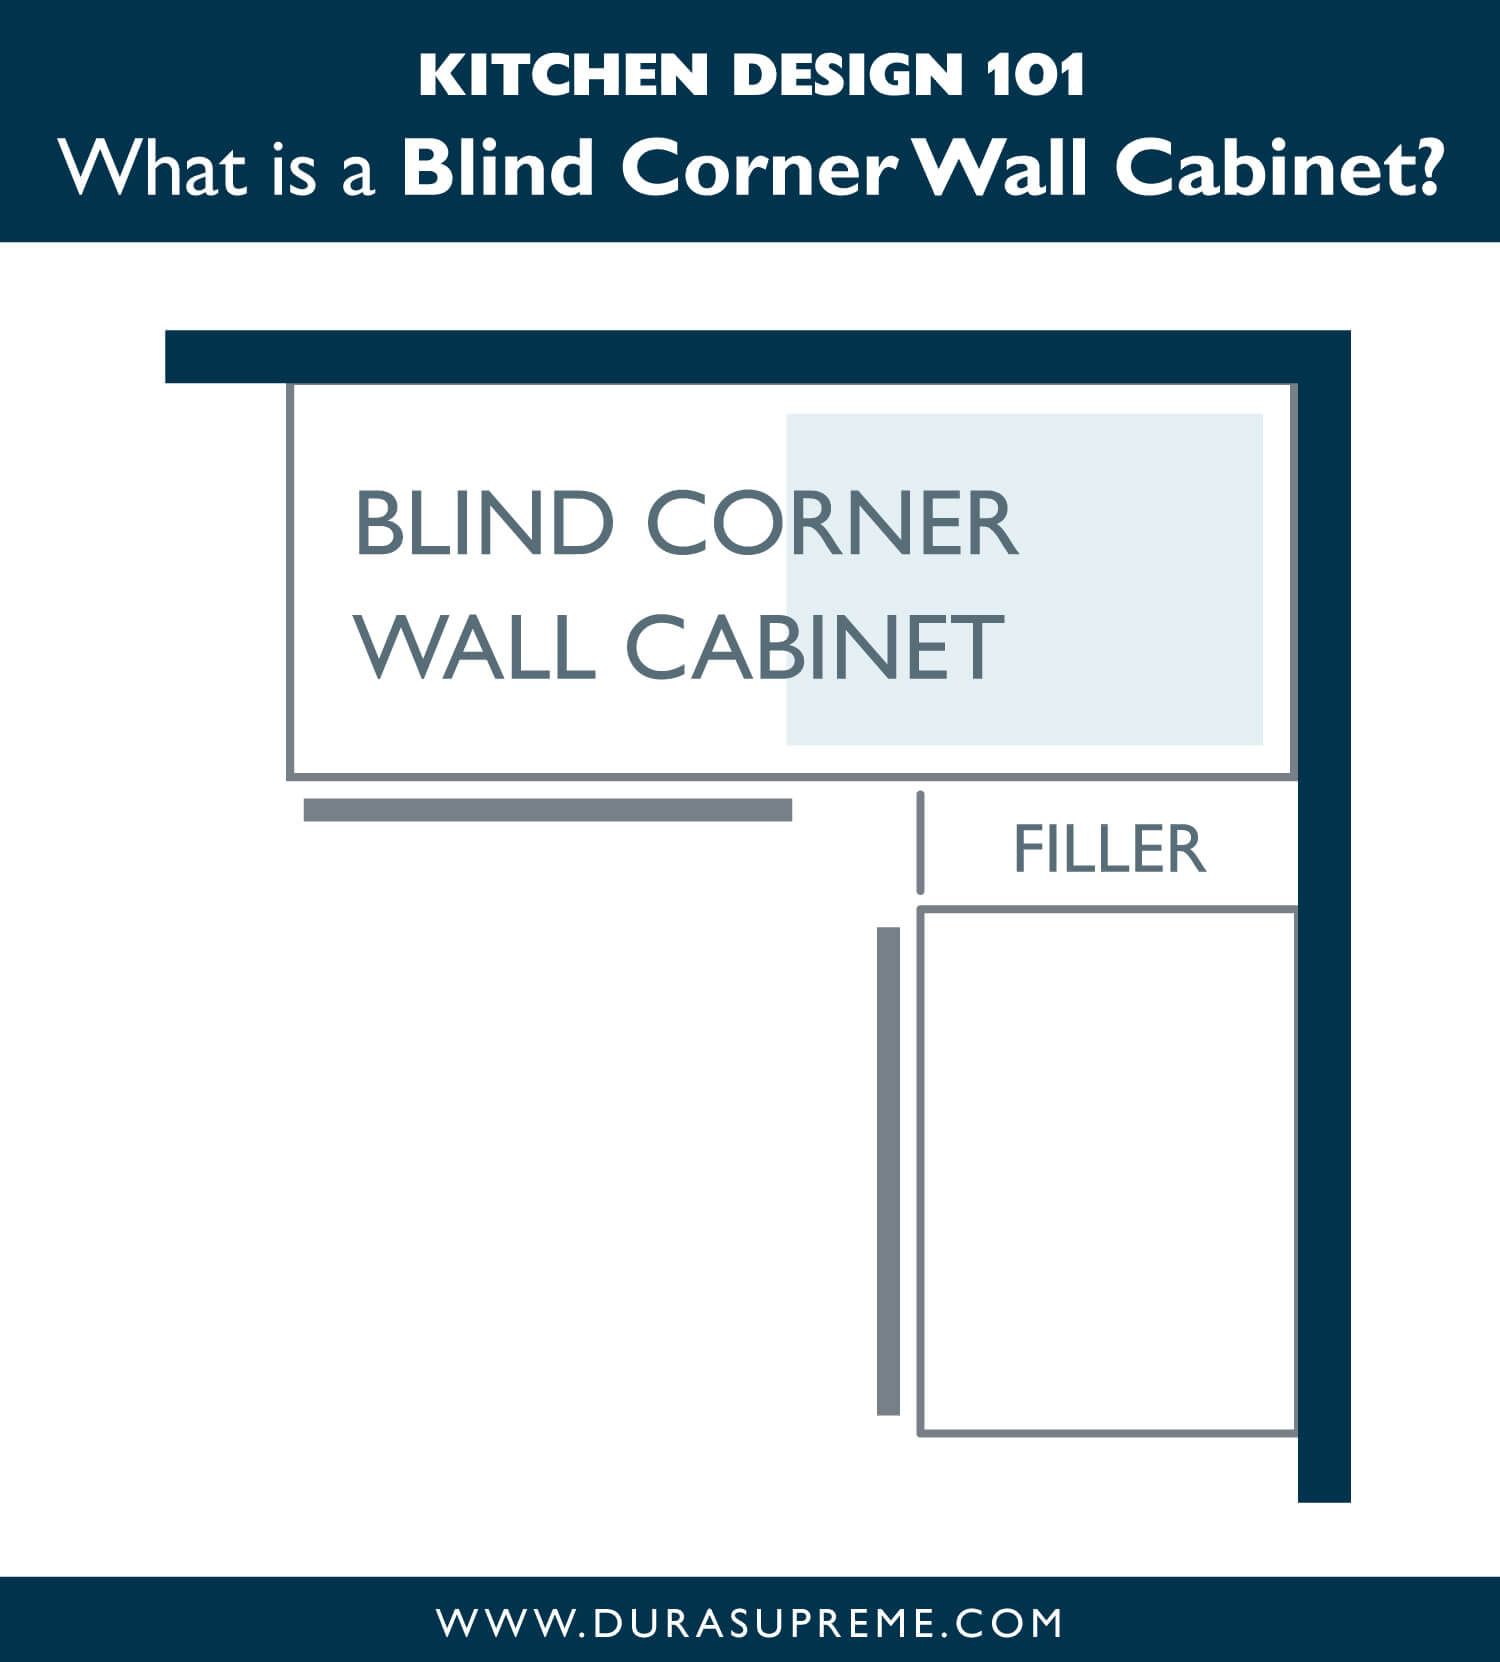 Kitchen Design 101: What is a Blind Corner Wall Cabinet? How to Select your kitchen cabinets.